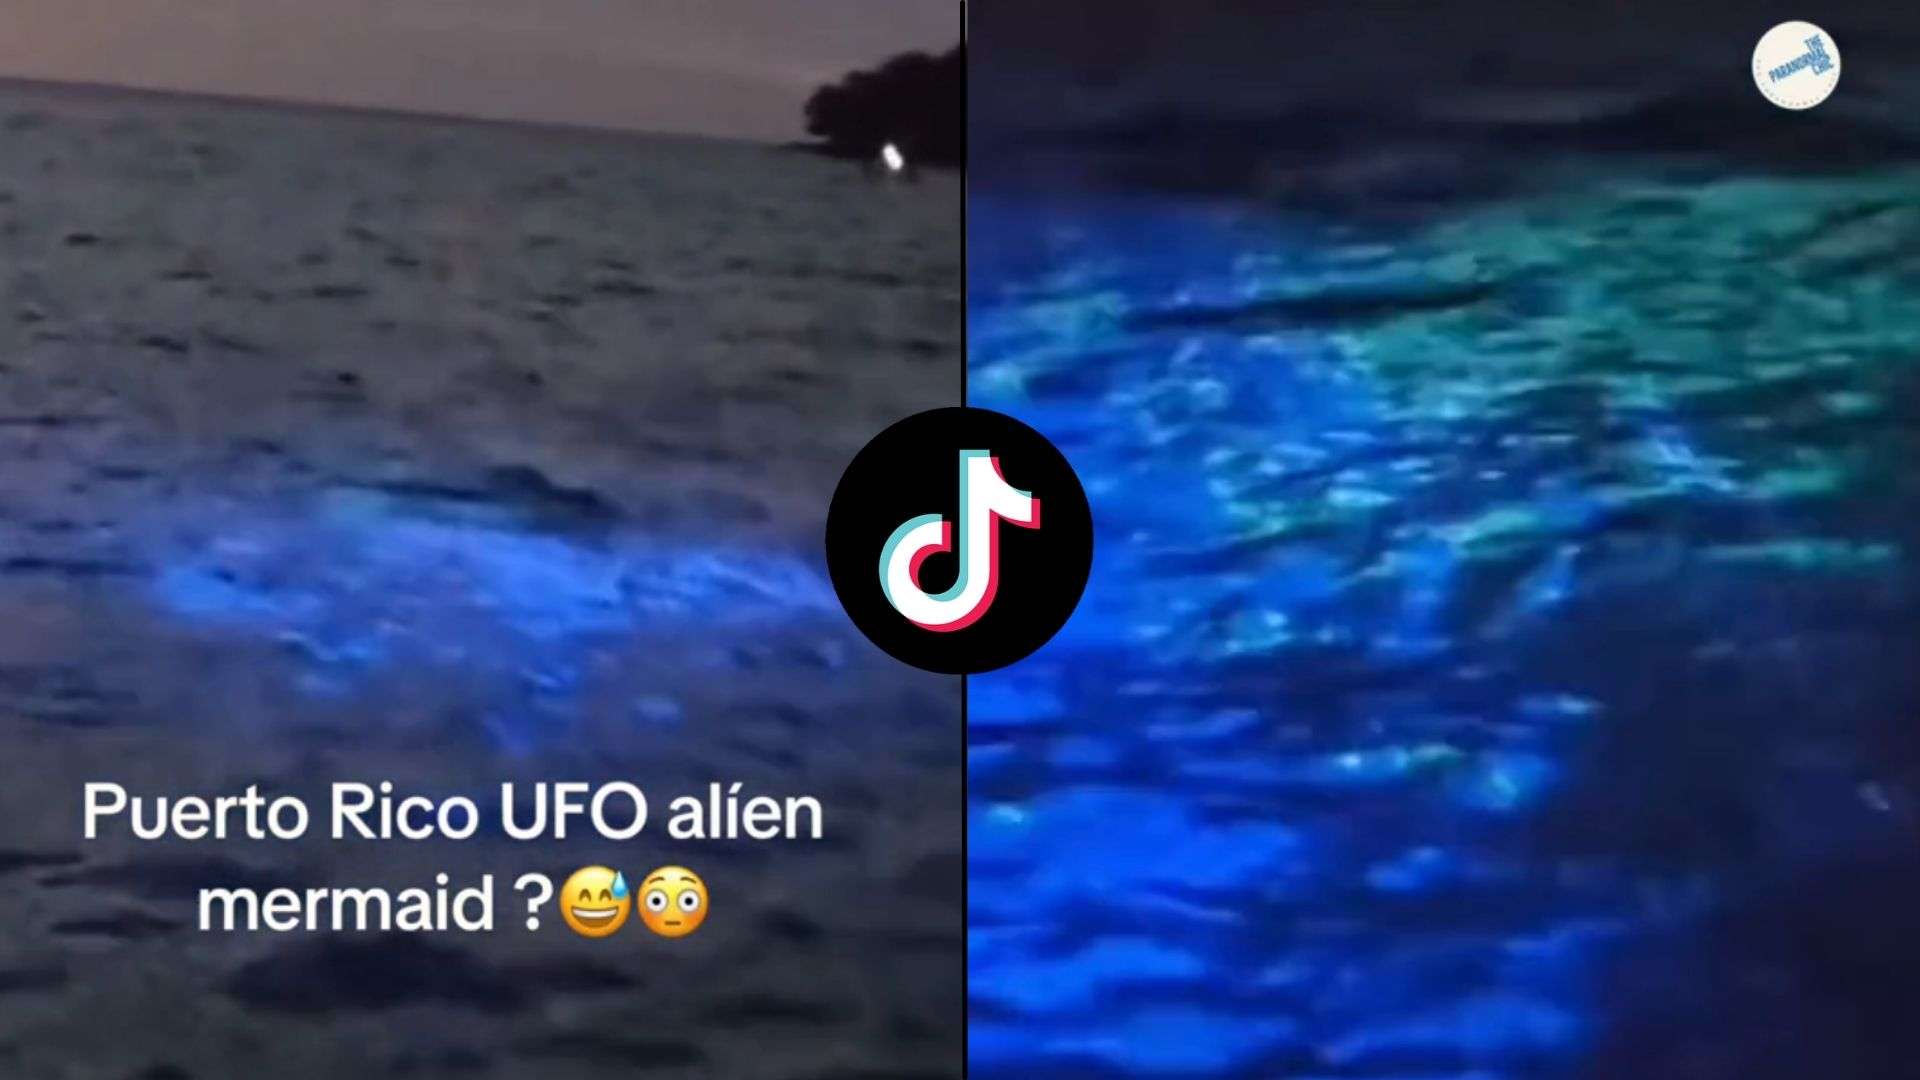 Screenshot of glowing blue water with tiktok logo and text overlaid